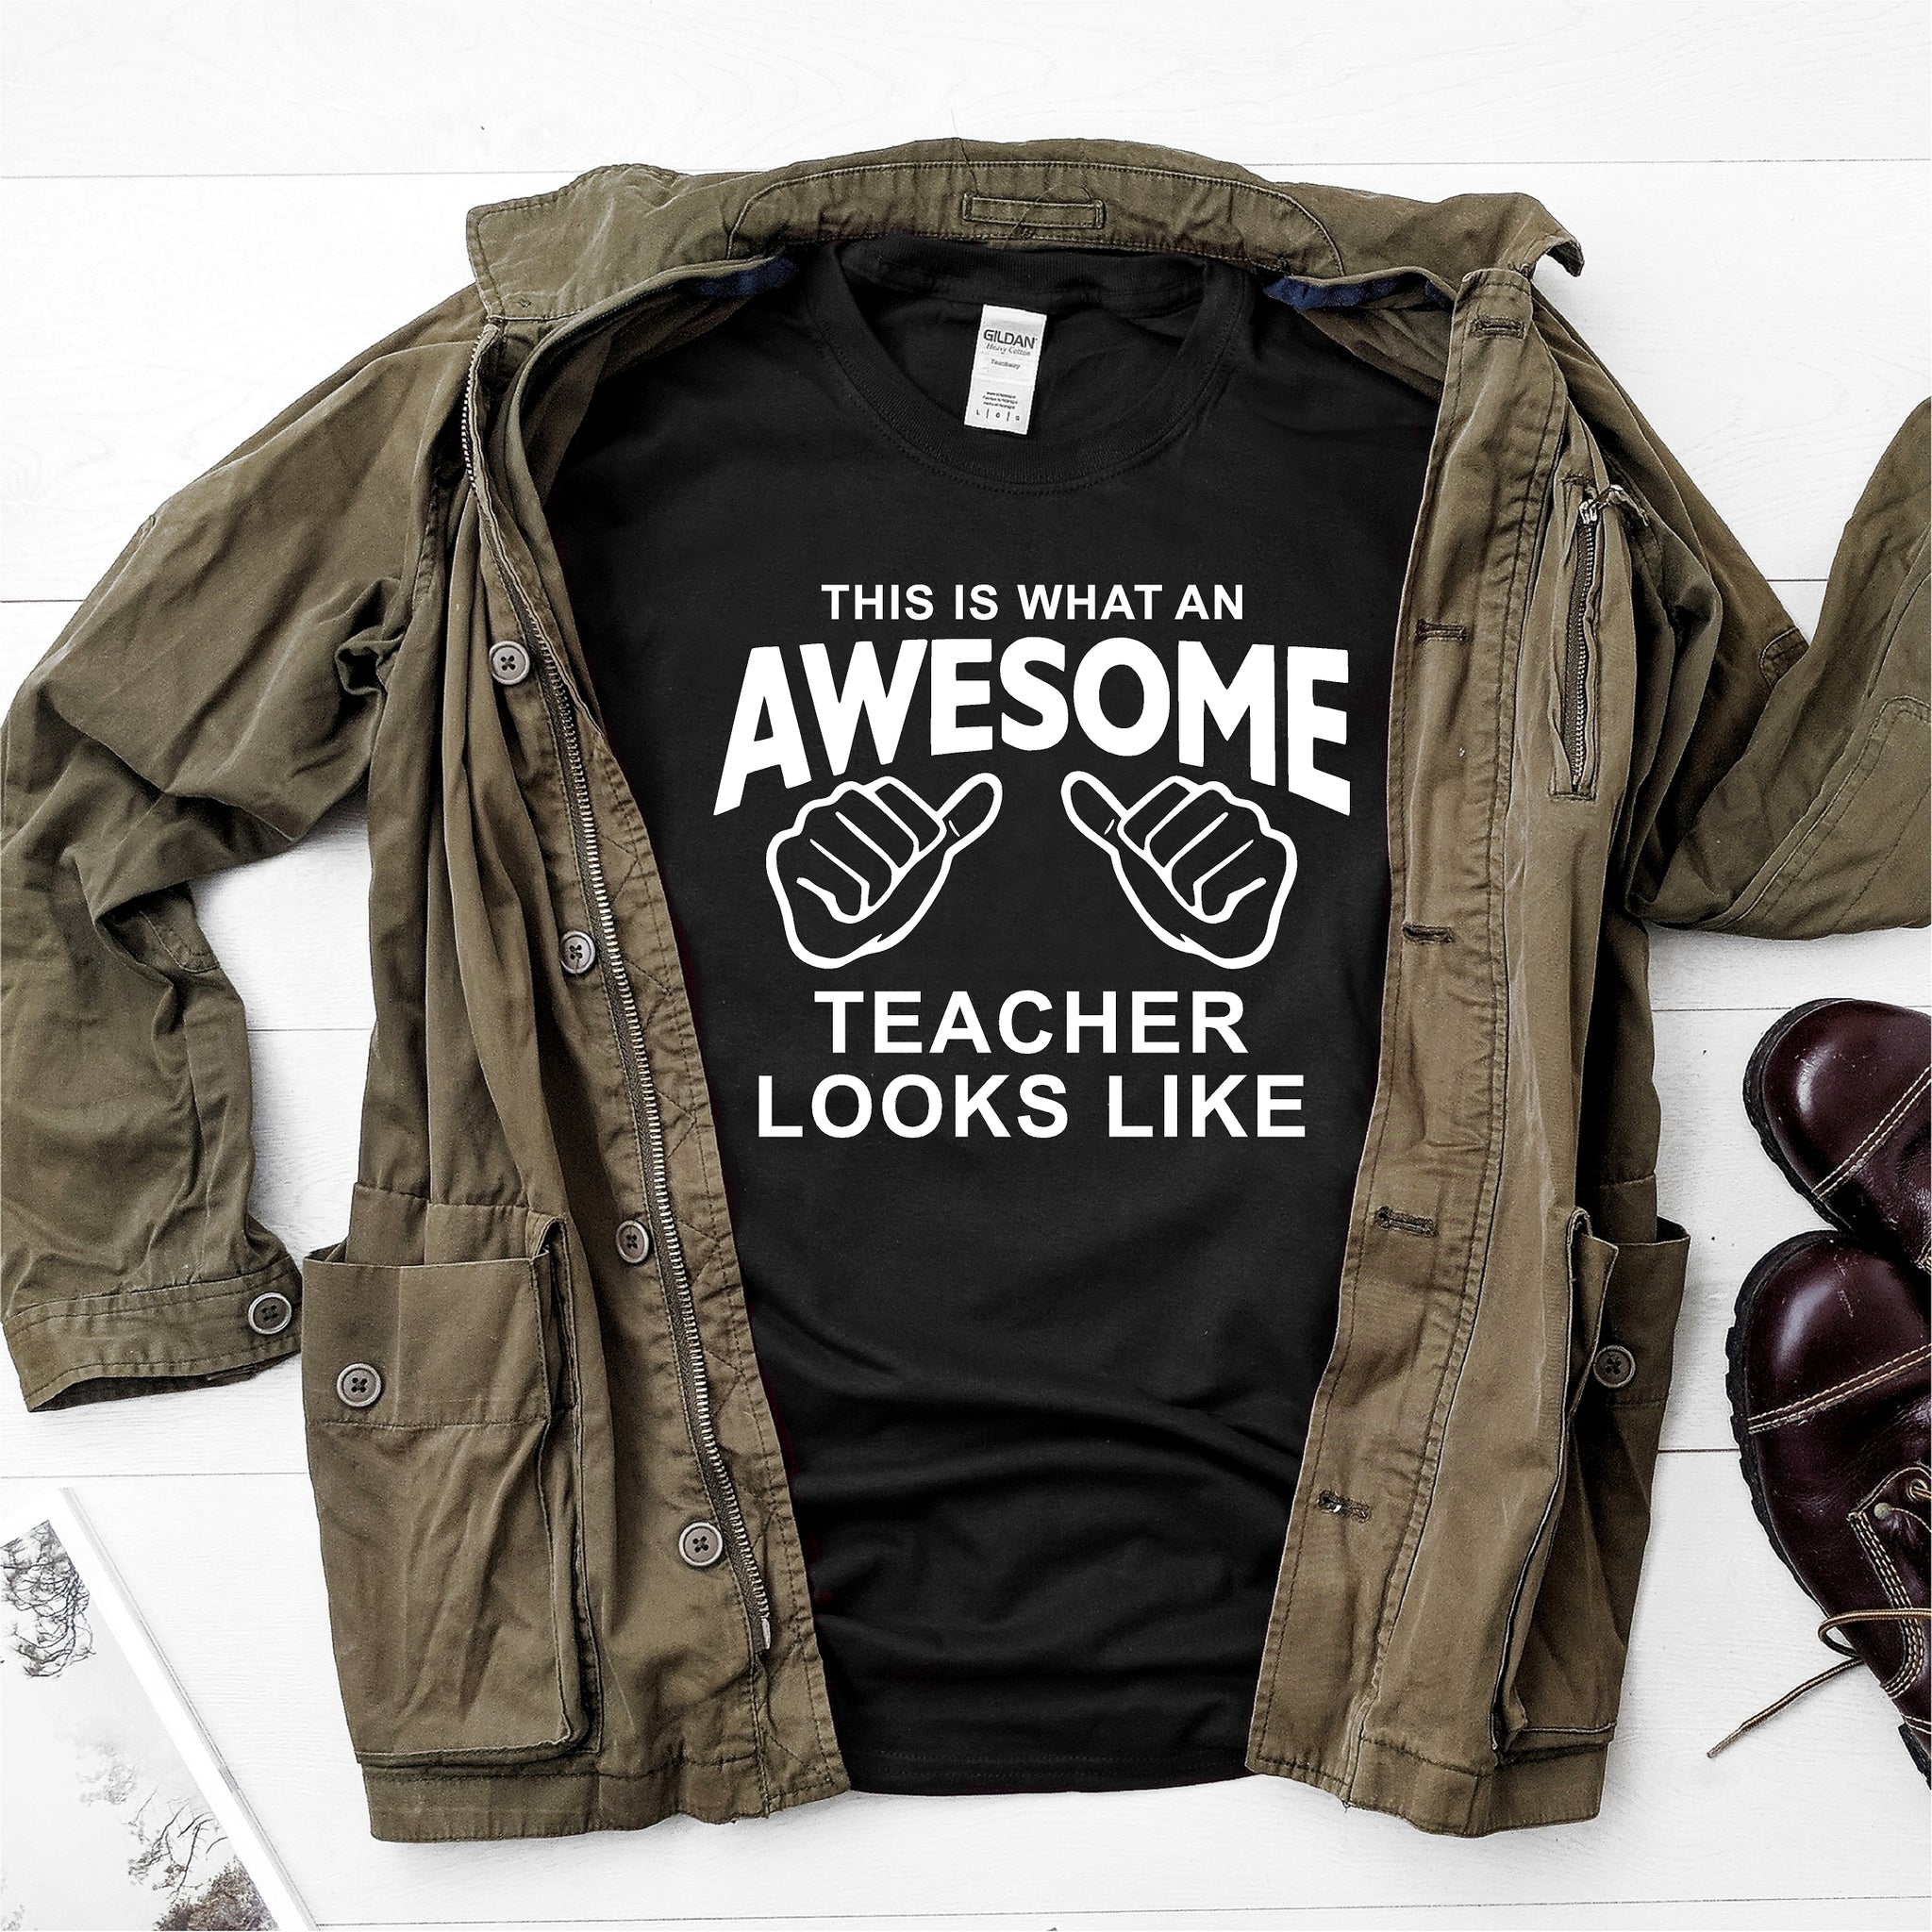 This is what an awesome teacher looks like- Ultra Cotton Short Sleeve T-Shirt - DFHM61